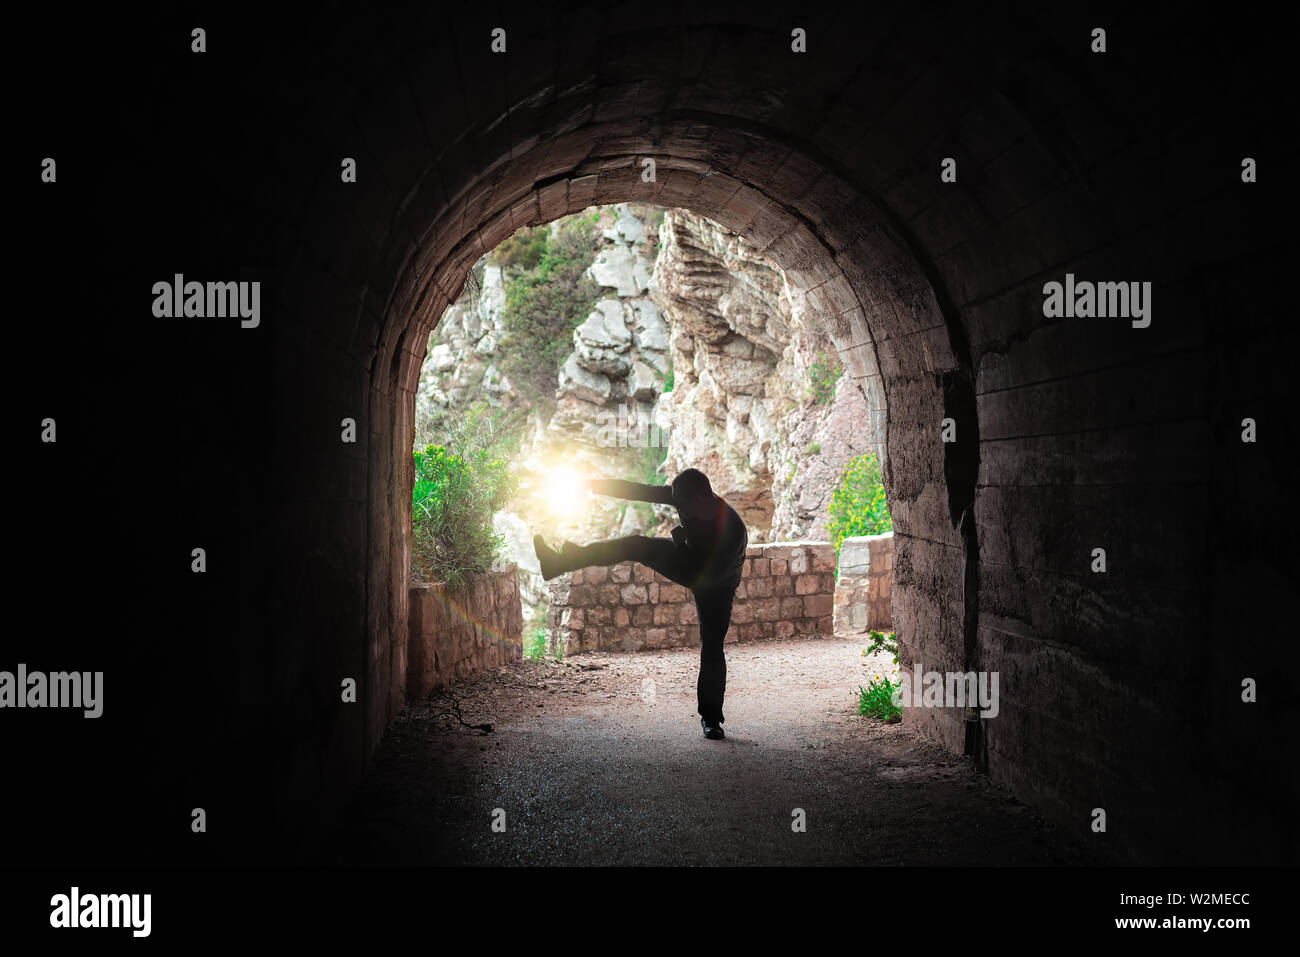 Silhouette of a man practicing karate moves in a dark tunnel Stock Photo